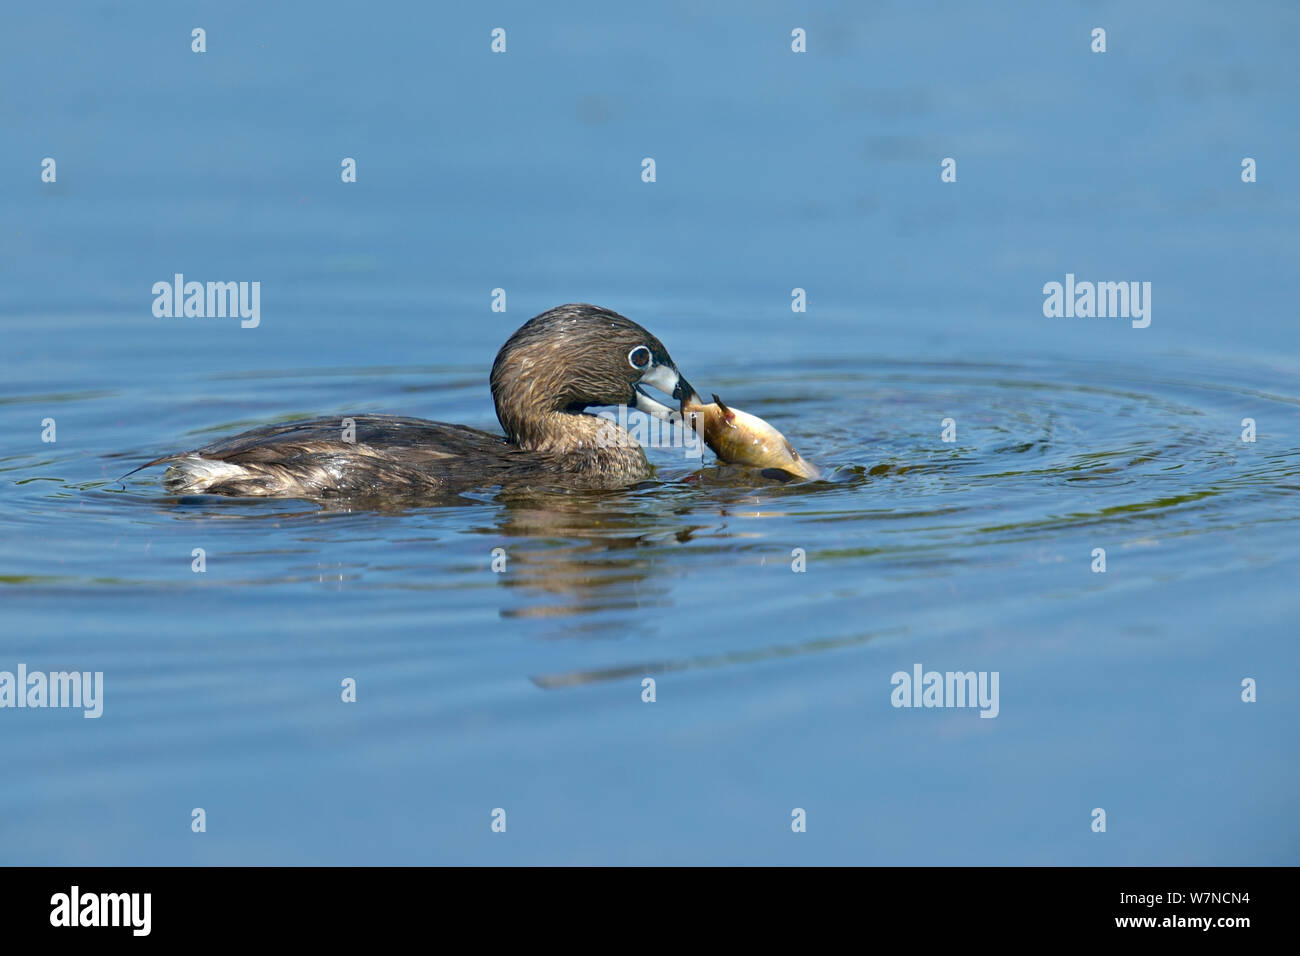 Pied-billed grebe (Podilymbus podiceps) with fish in beak, Quebec, Canada, May Stock Photo